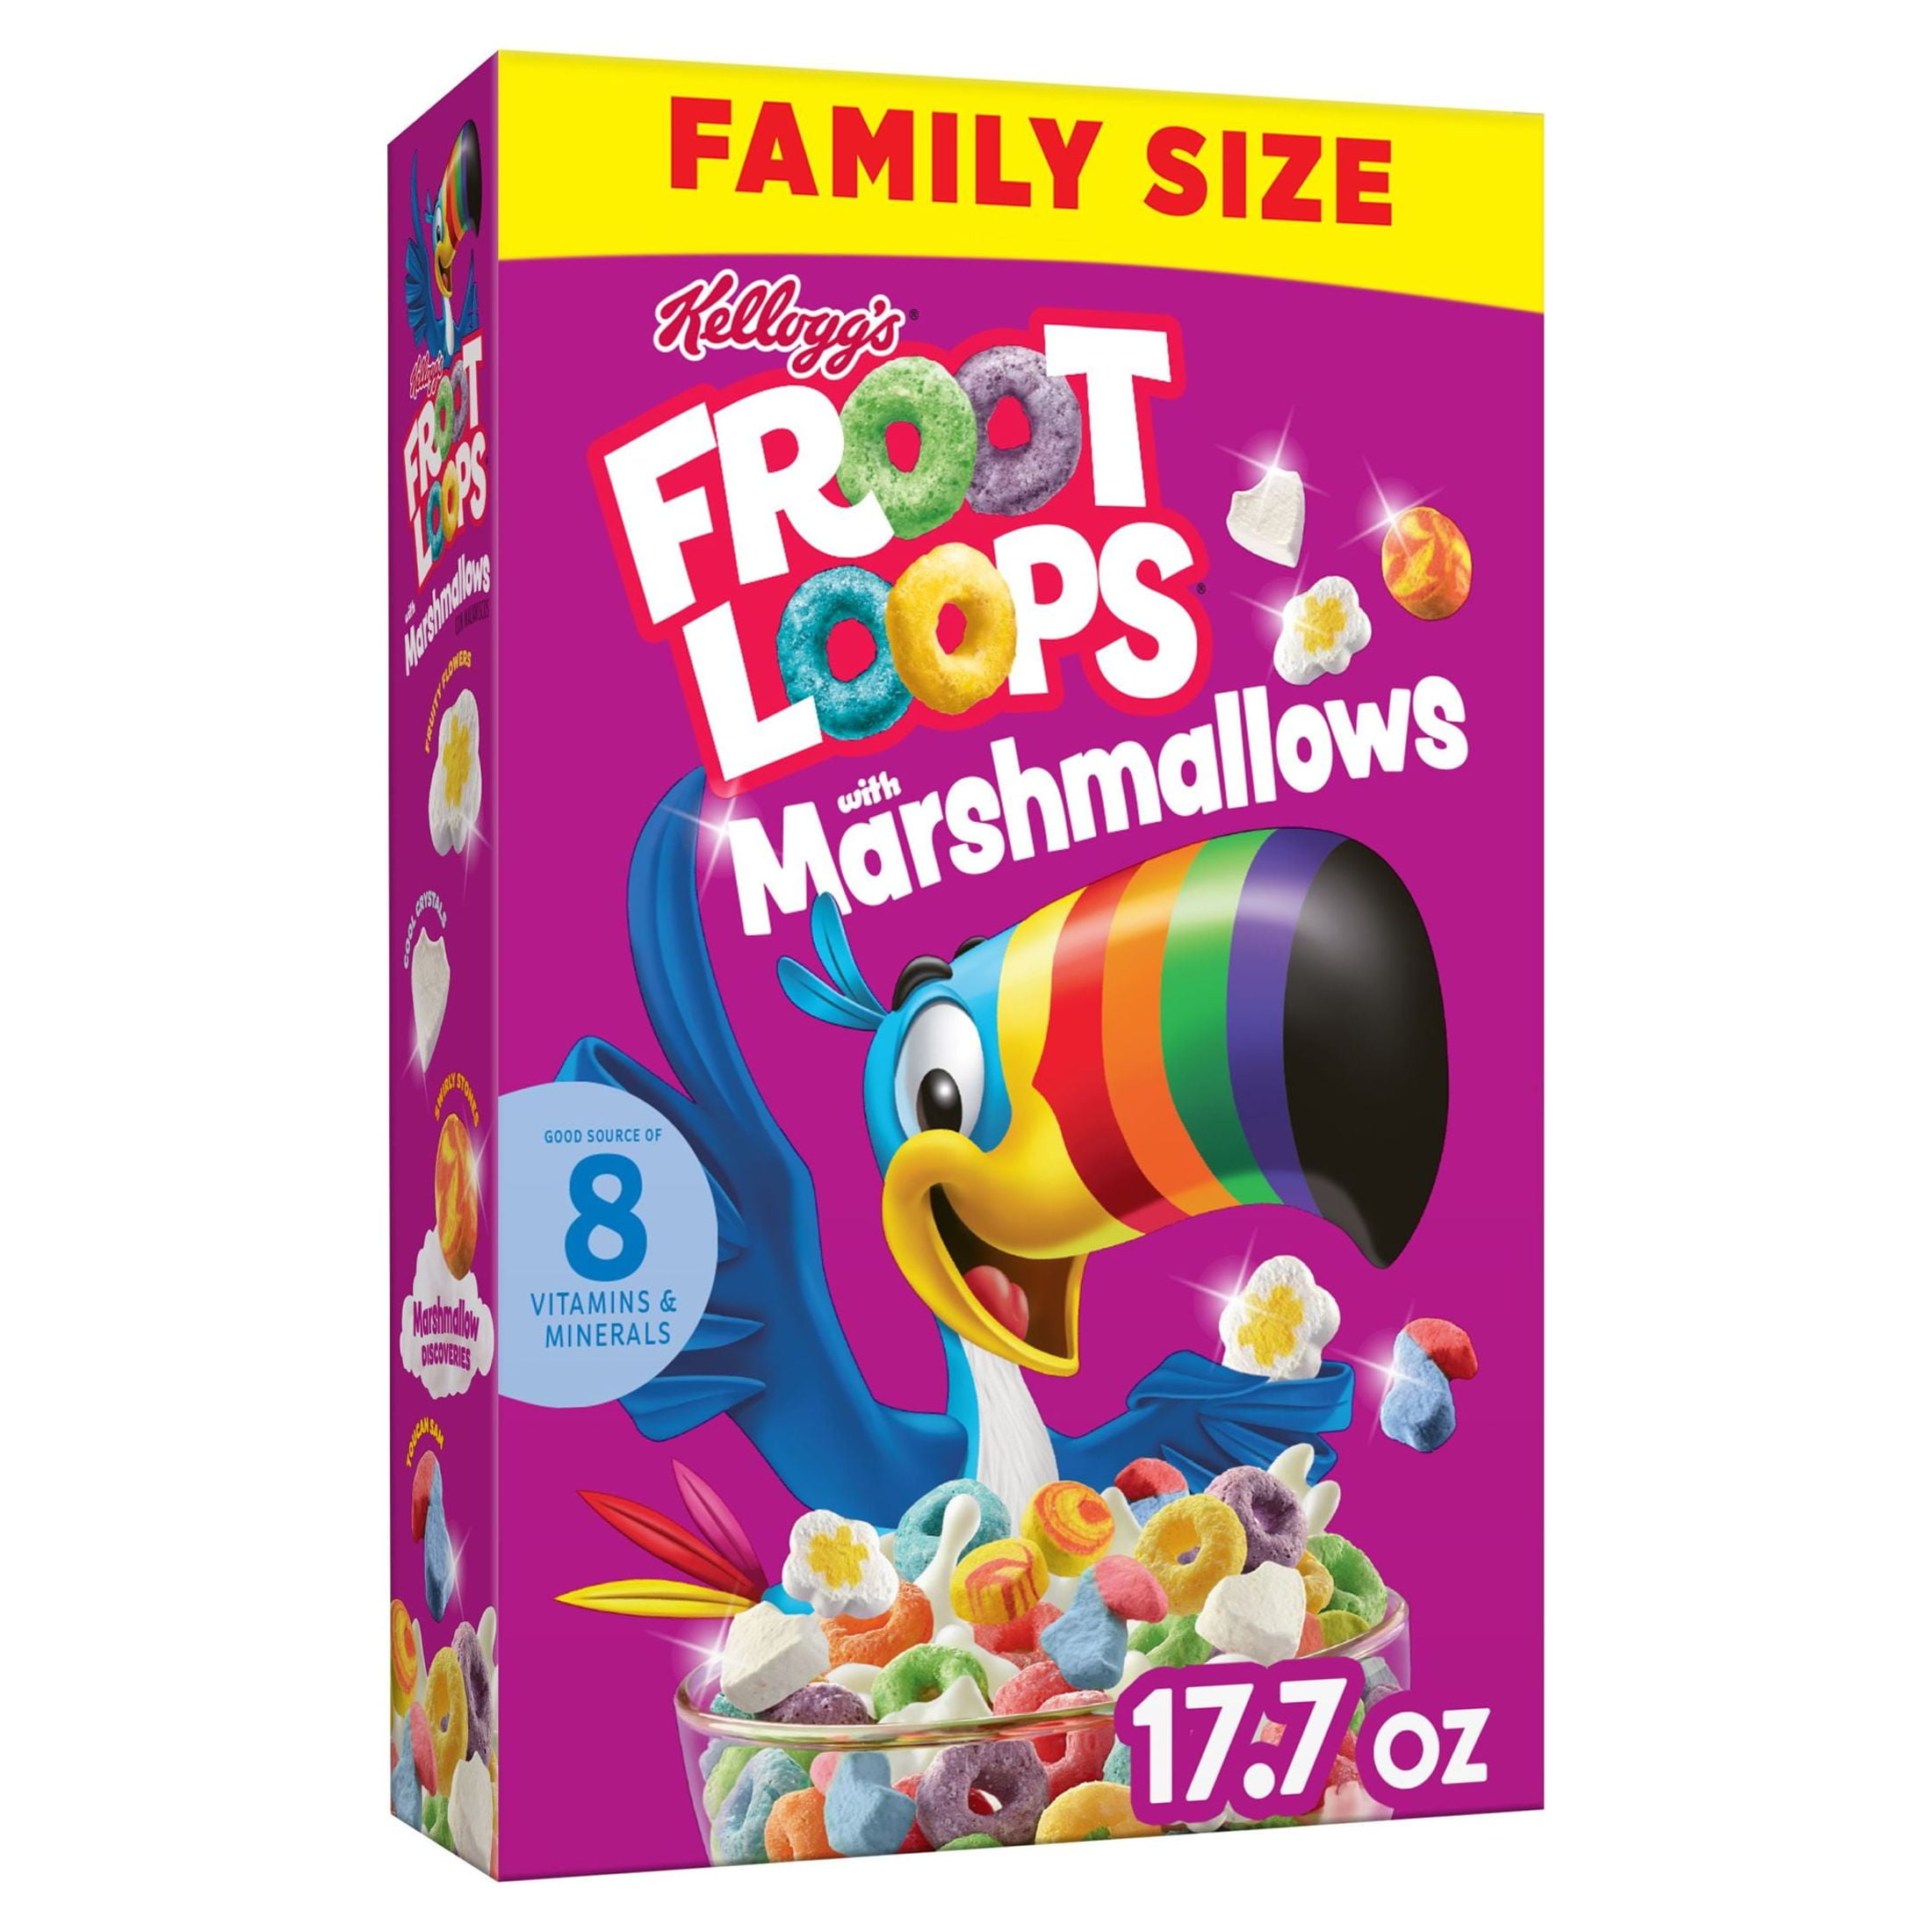 Size,　Breakfast　Kellogg's　Original　Froot　oz　with　Loops　Family　17.7　Marshmallows　Cereal,　Box